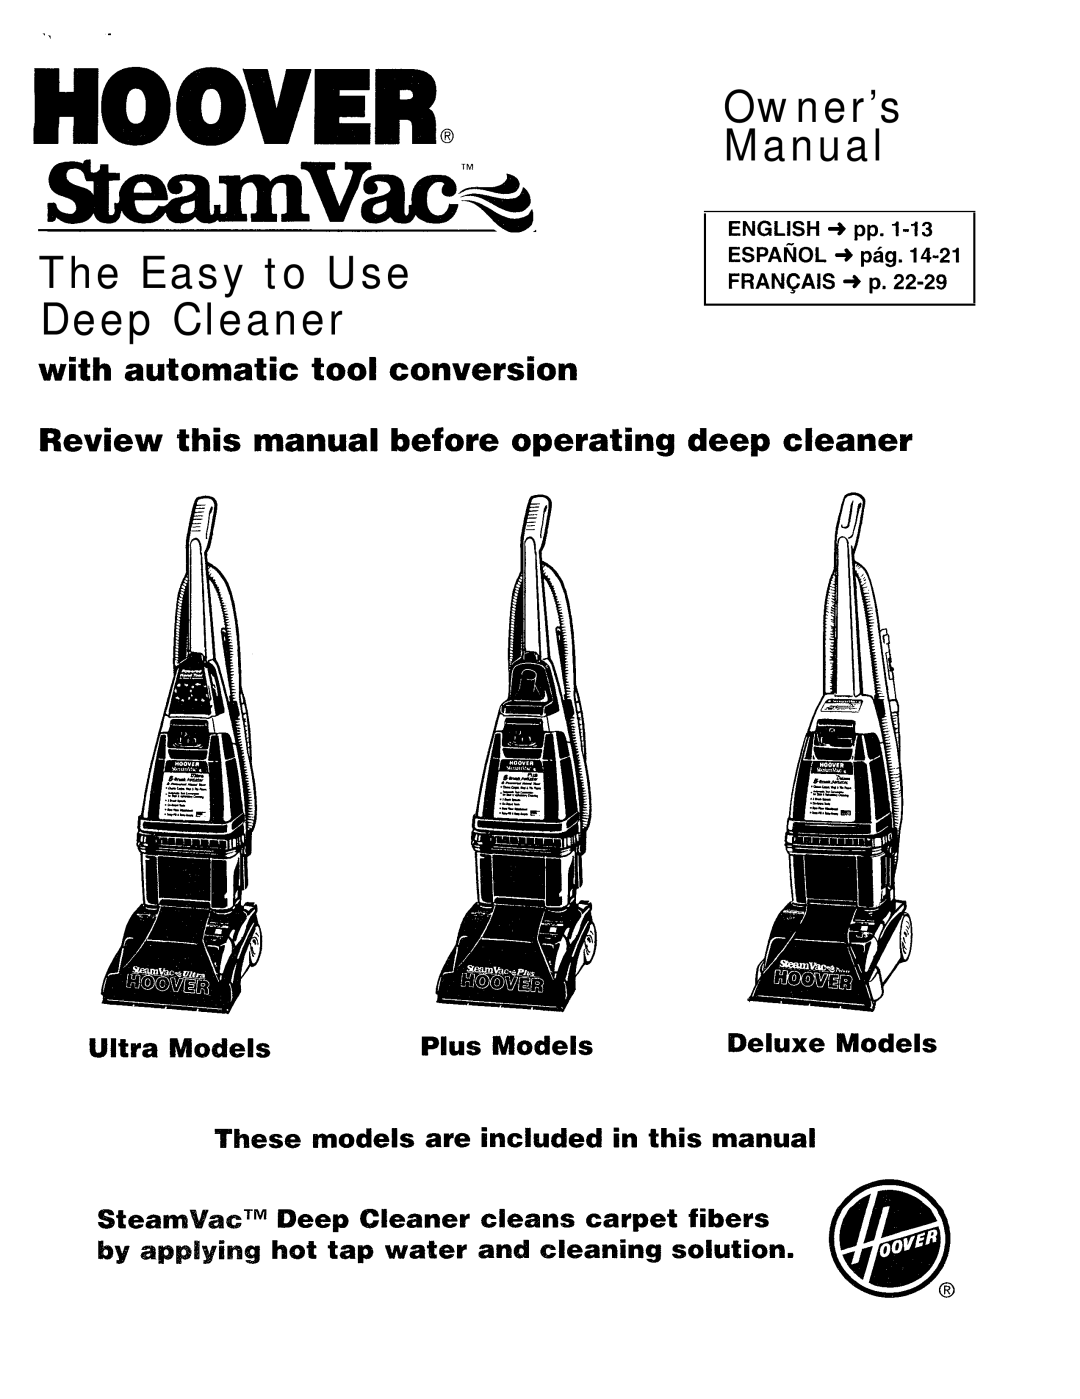 Hoover Ultra Plus, Deluxe owner manual With automatic tool conversion, Review this manual before operating deep cleaner 